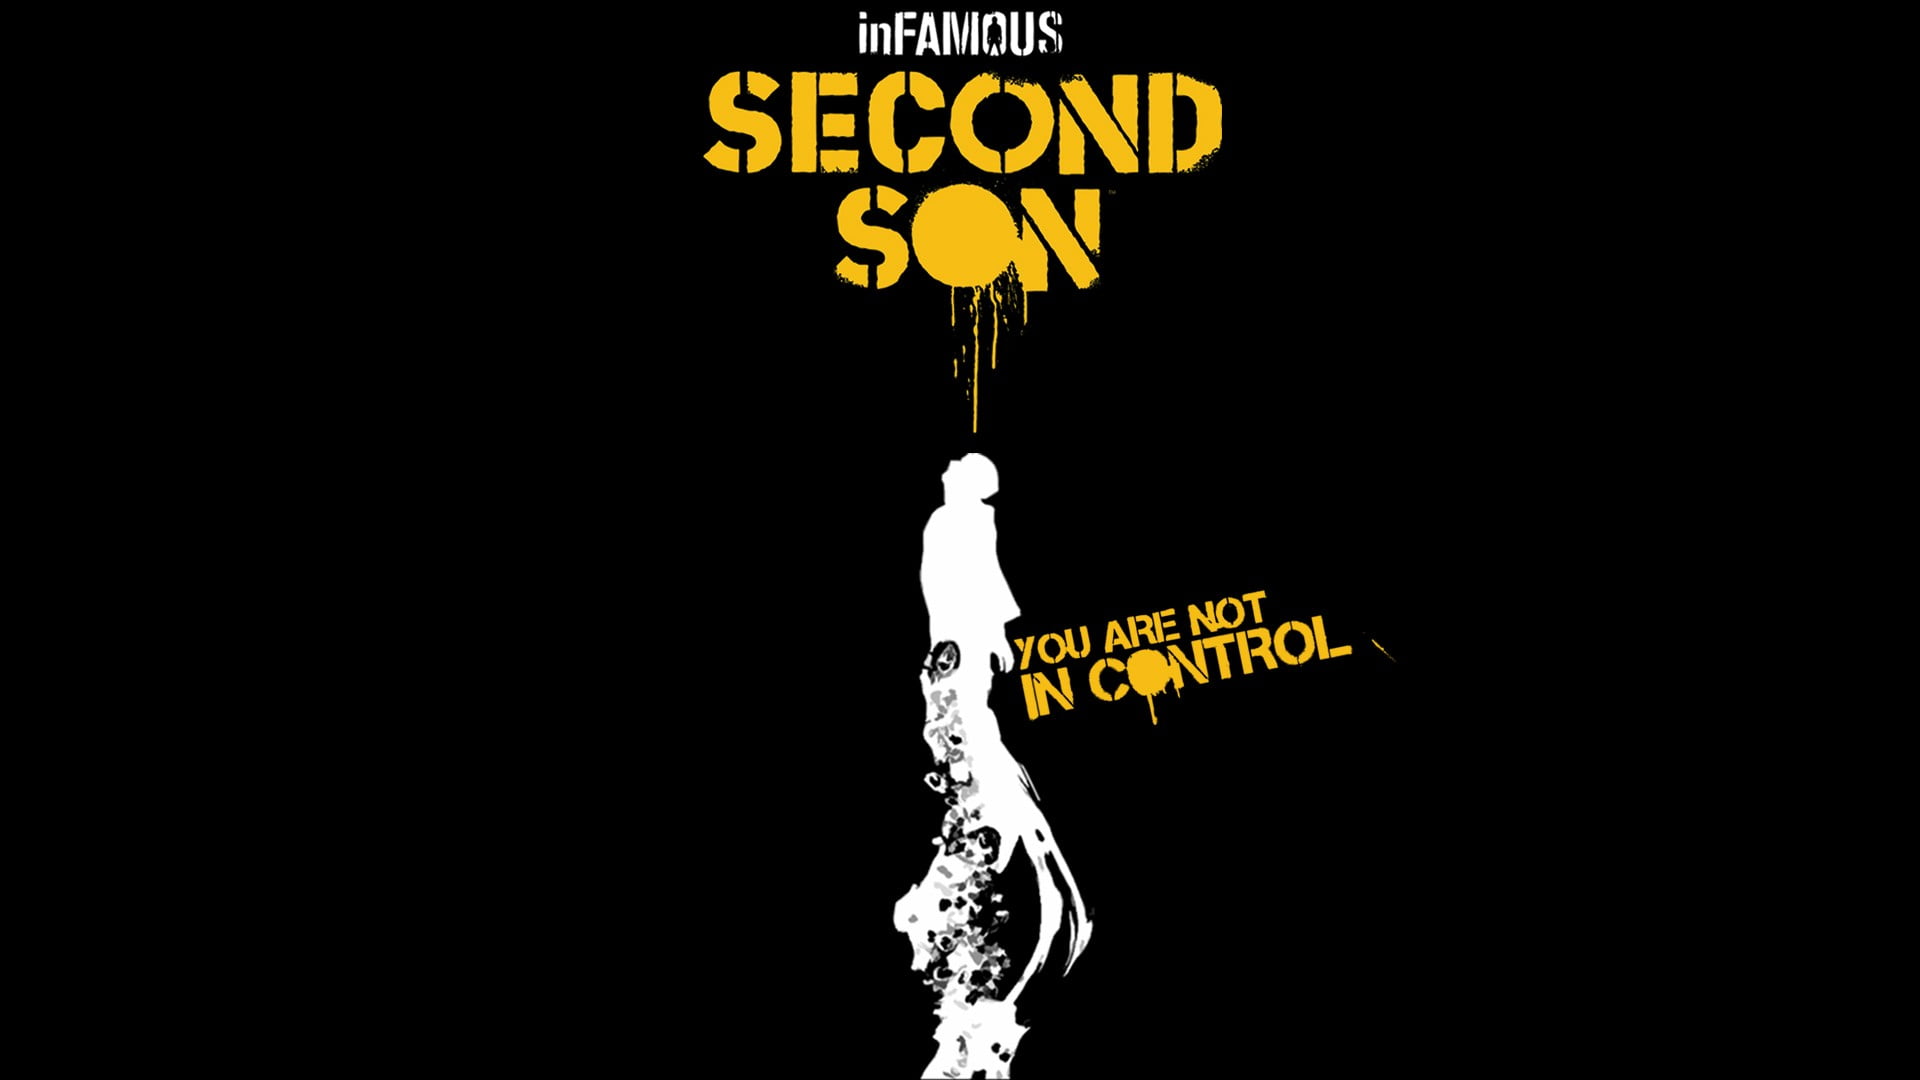 Infamous Second Son screen shor